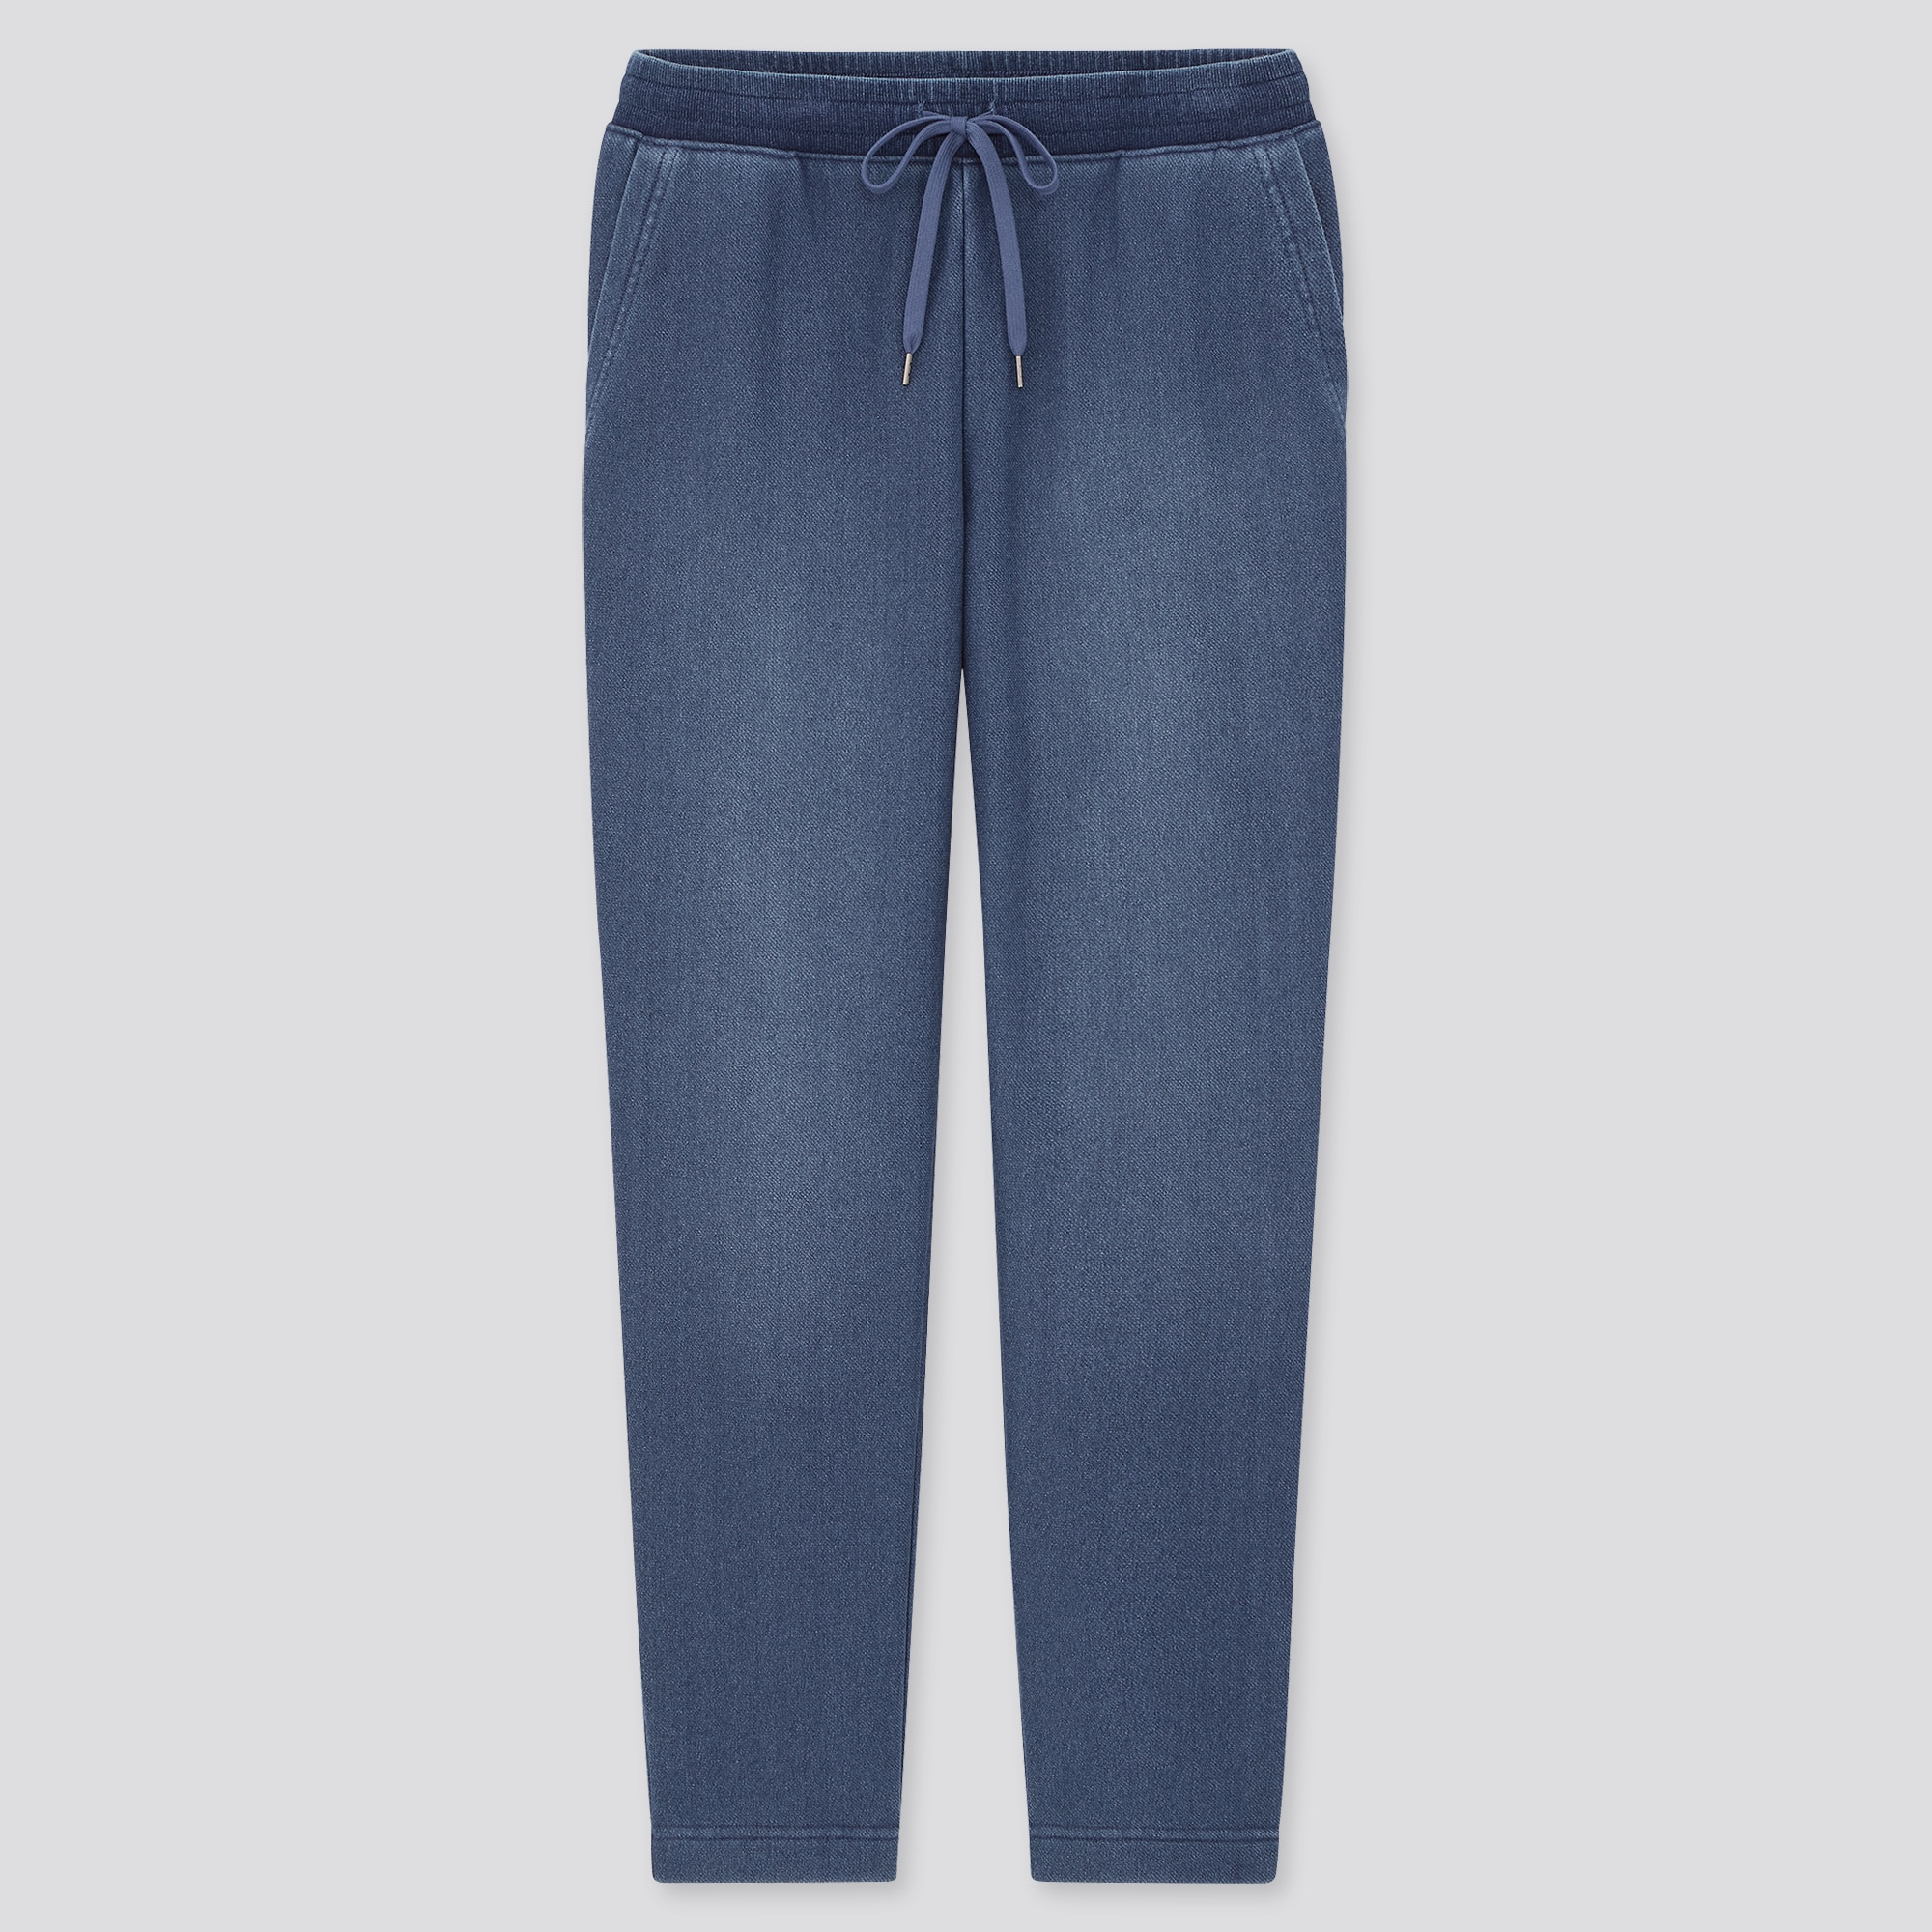 womens lined blue jeans